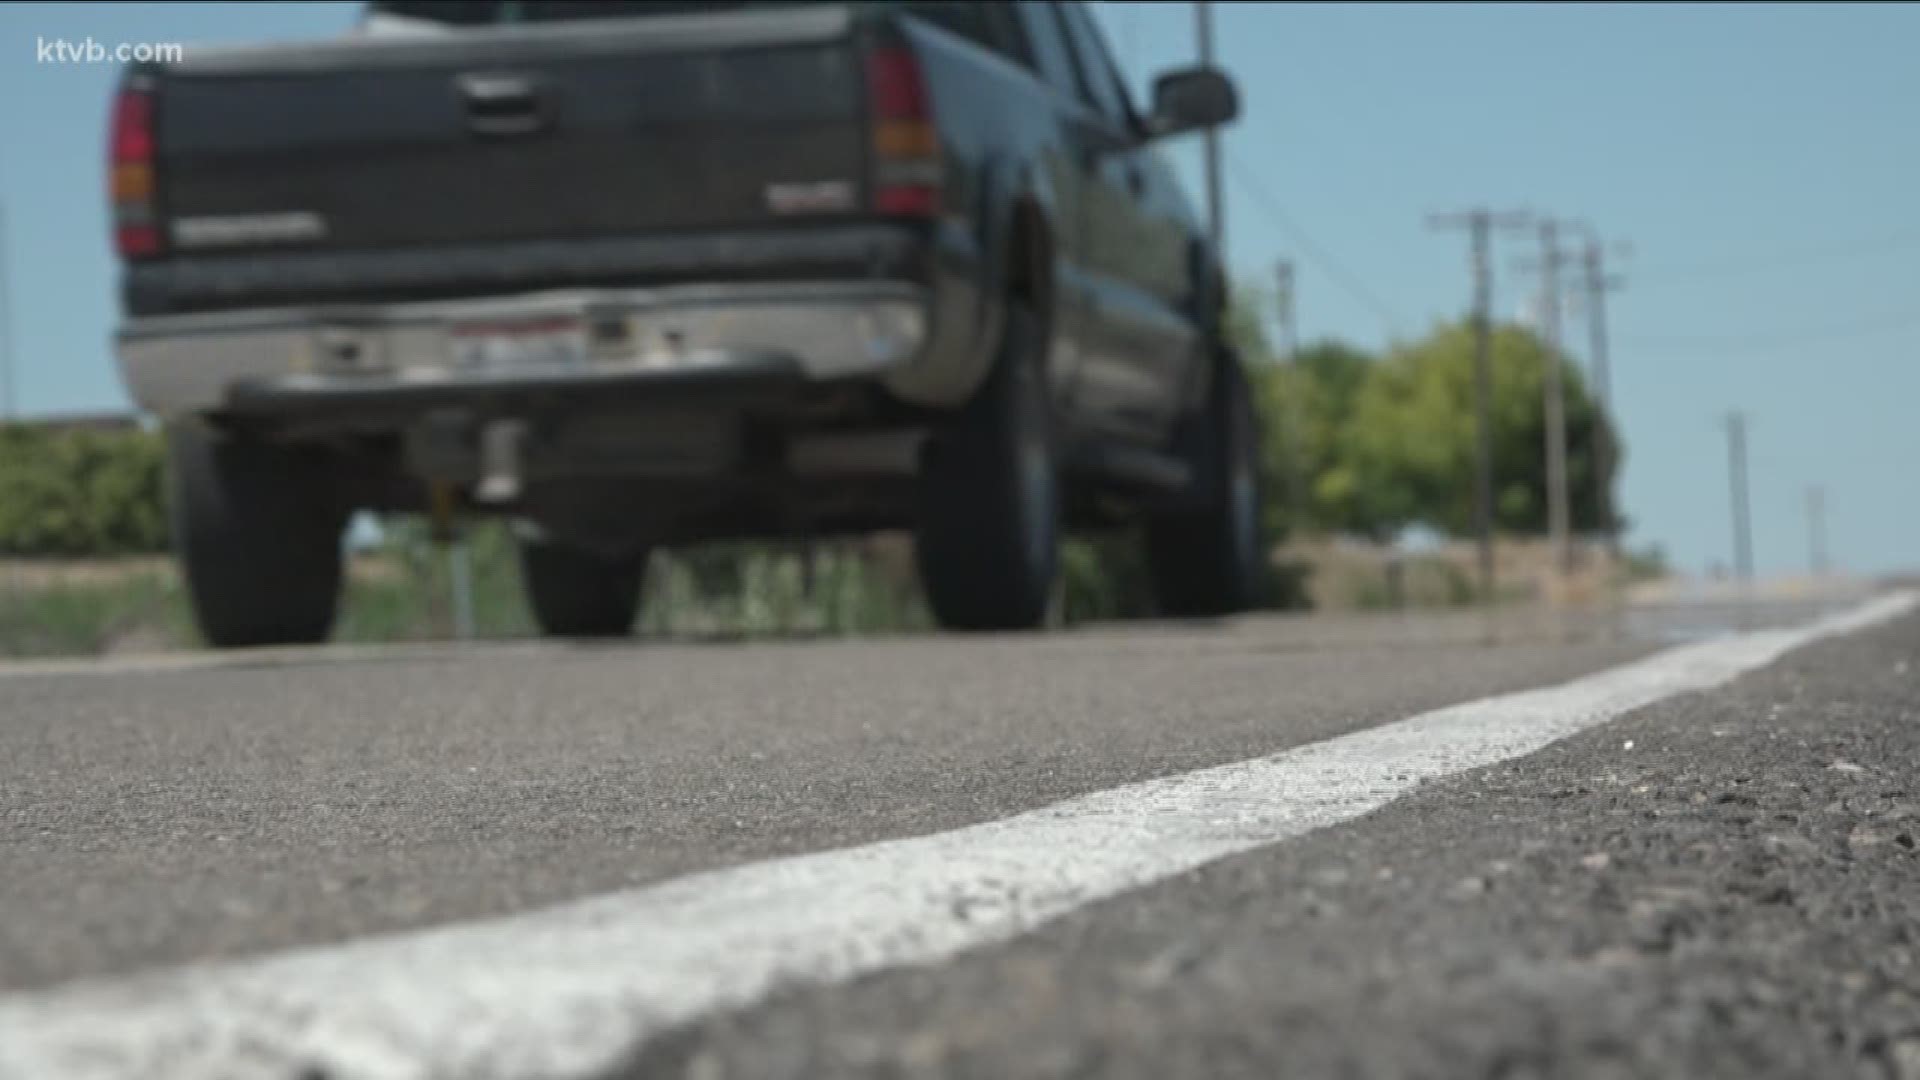 The child was identified Monday morning by the Ada County Coroner as Eduard Prokopchuk of Nampa. His death has been ruled an accident. According to the Ada County Sheriff's Office, Prokopchuk was riding his bicycle along West Amity Road with two other children when the crash happened at about 7:30 p.m.